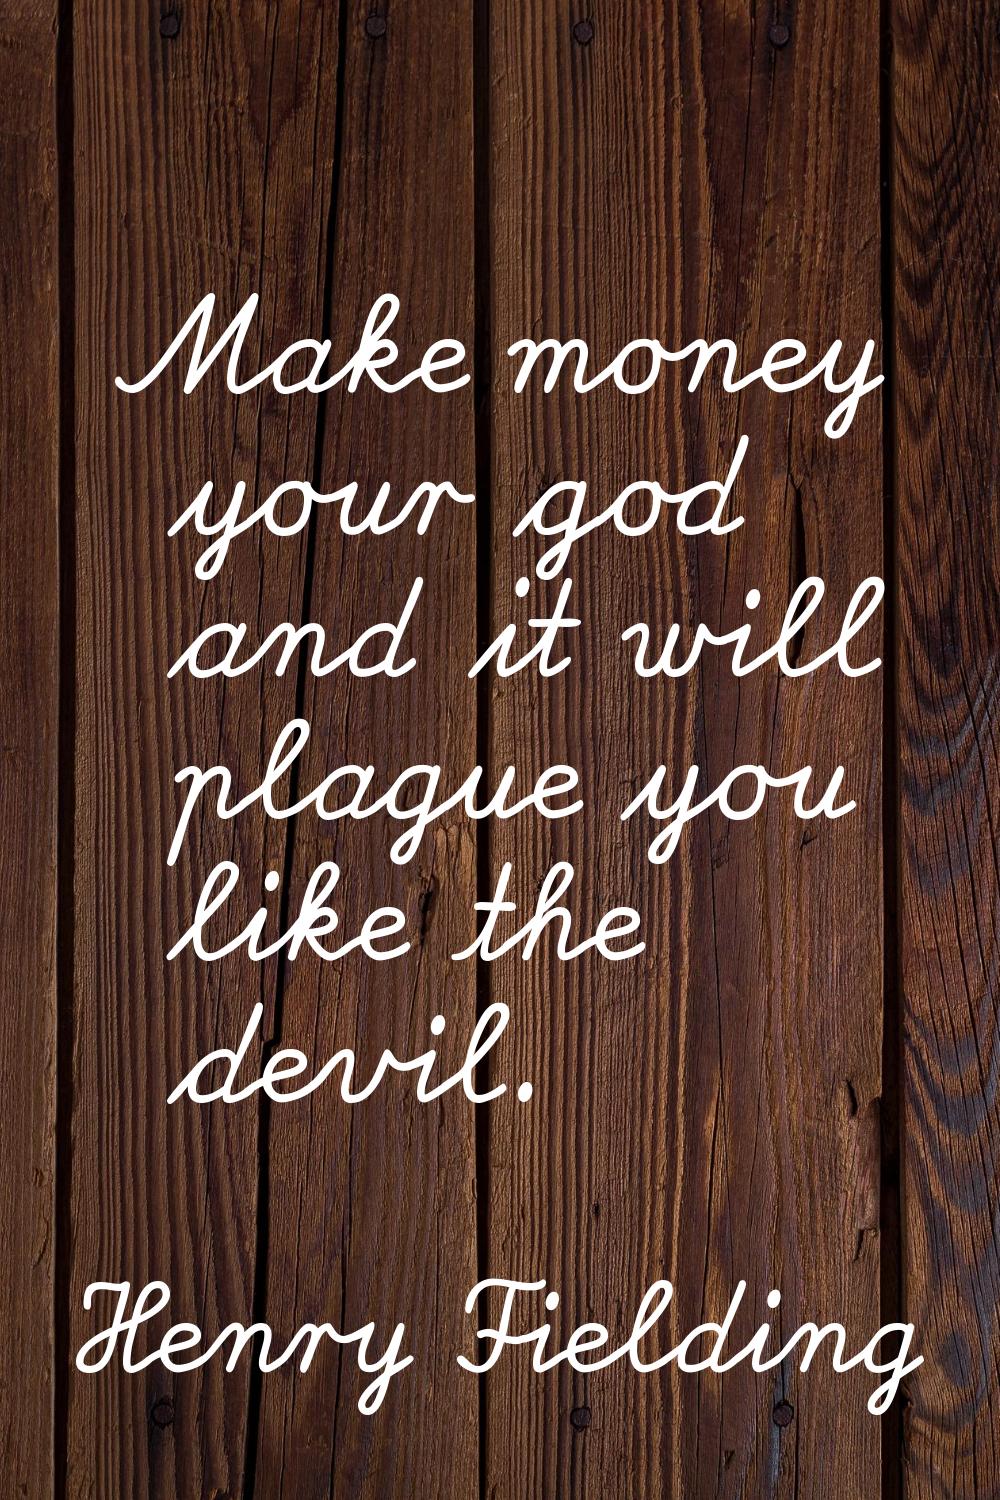 Make money your god and it will plague you like the devil.